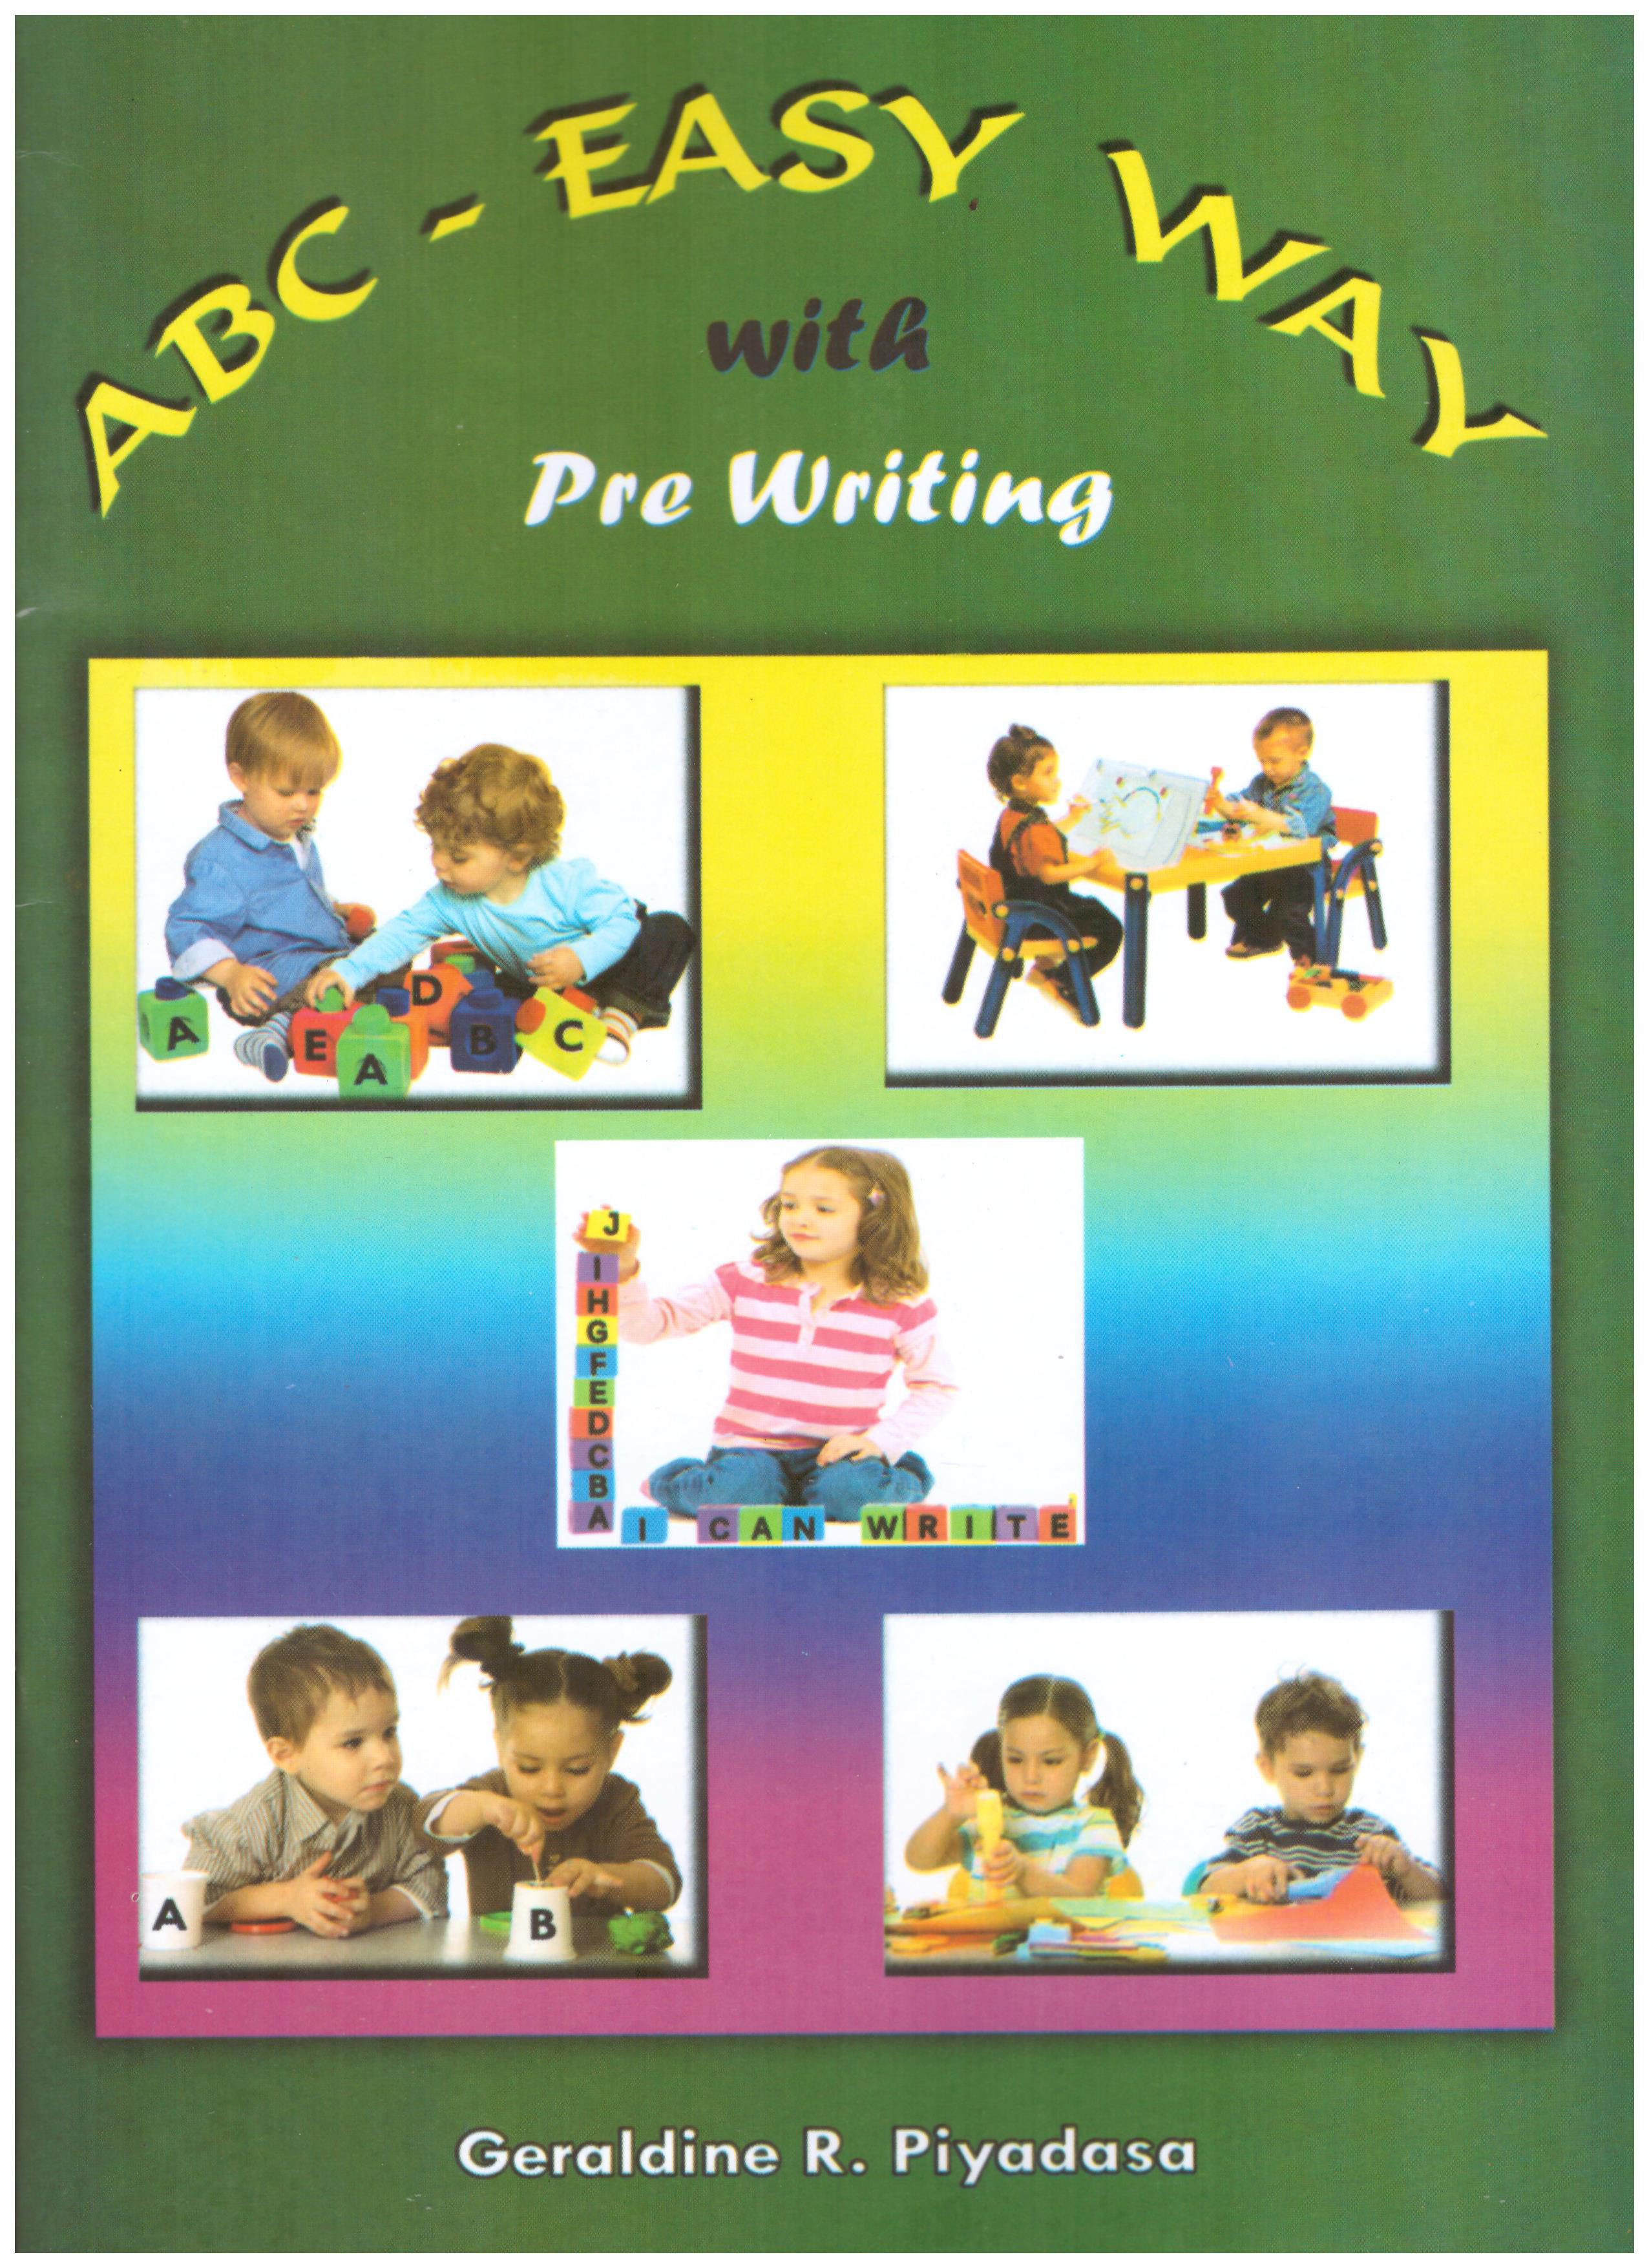 ABC - Easy Way with Pre Writing